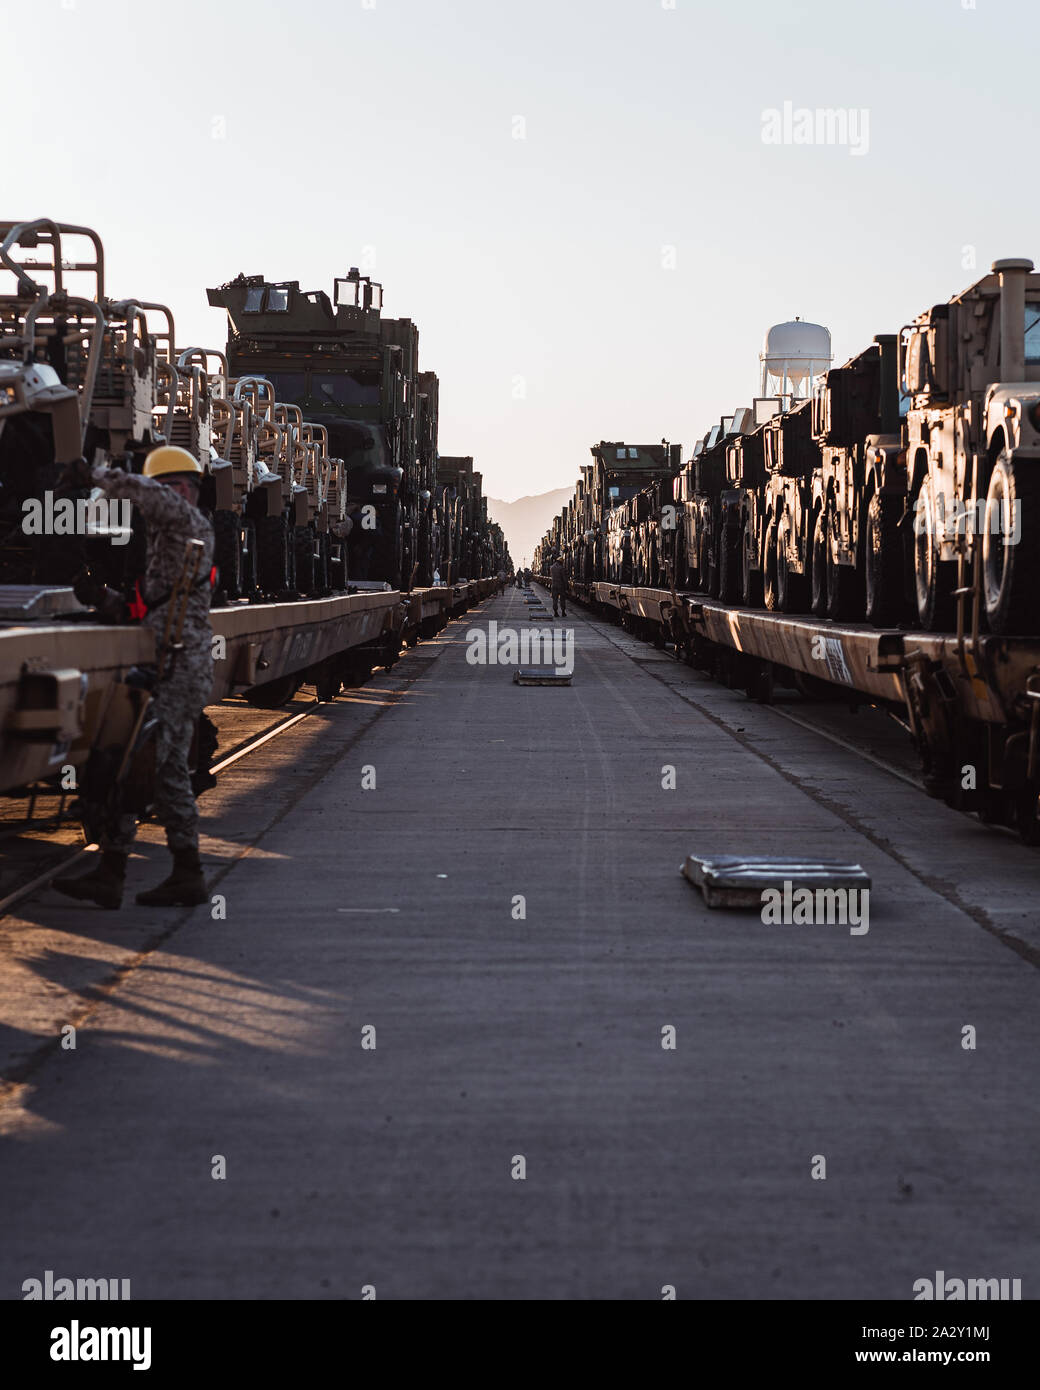 U.S. Marines with 2nd Marine Division unload tactical vehicles from a locomotive at Marine Corps Logistics Base, Barstow, Oct. 1, 2019. The vehicles will be used in the upcoming Integrated Training Exercise taking place at Marine Corps Air Ground Combat Center Twentynine Palms. (U.S. Marine Corps Photo by Lance Cpl. Corey Mathews) Stock Photo